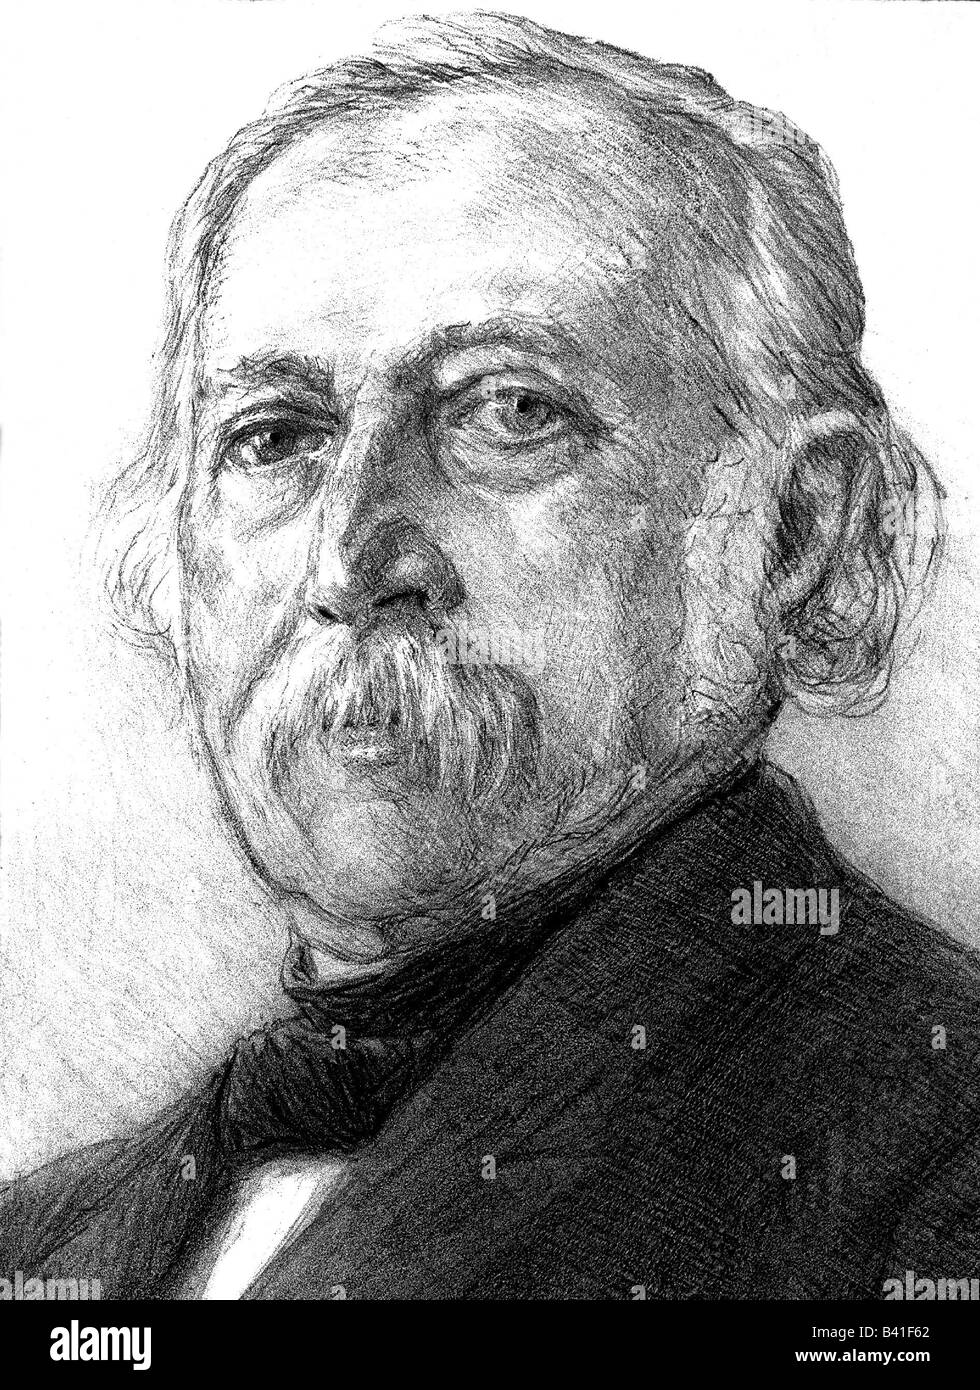 Fontane, Theodor, 30.12.1819 - 20.9.1898, German author / writer, poet, portrait, drawing by Max Liebermann (1874 - 1935), 19th century, , Stock Photo